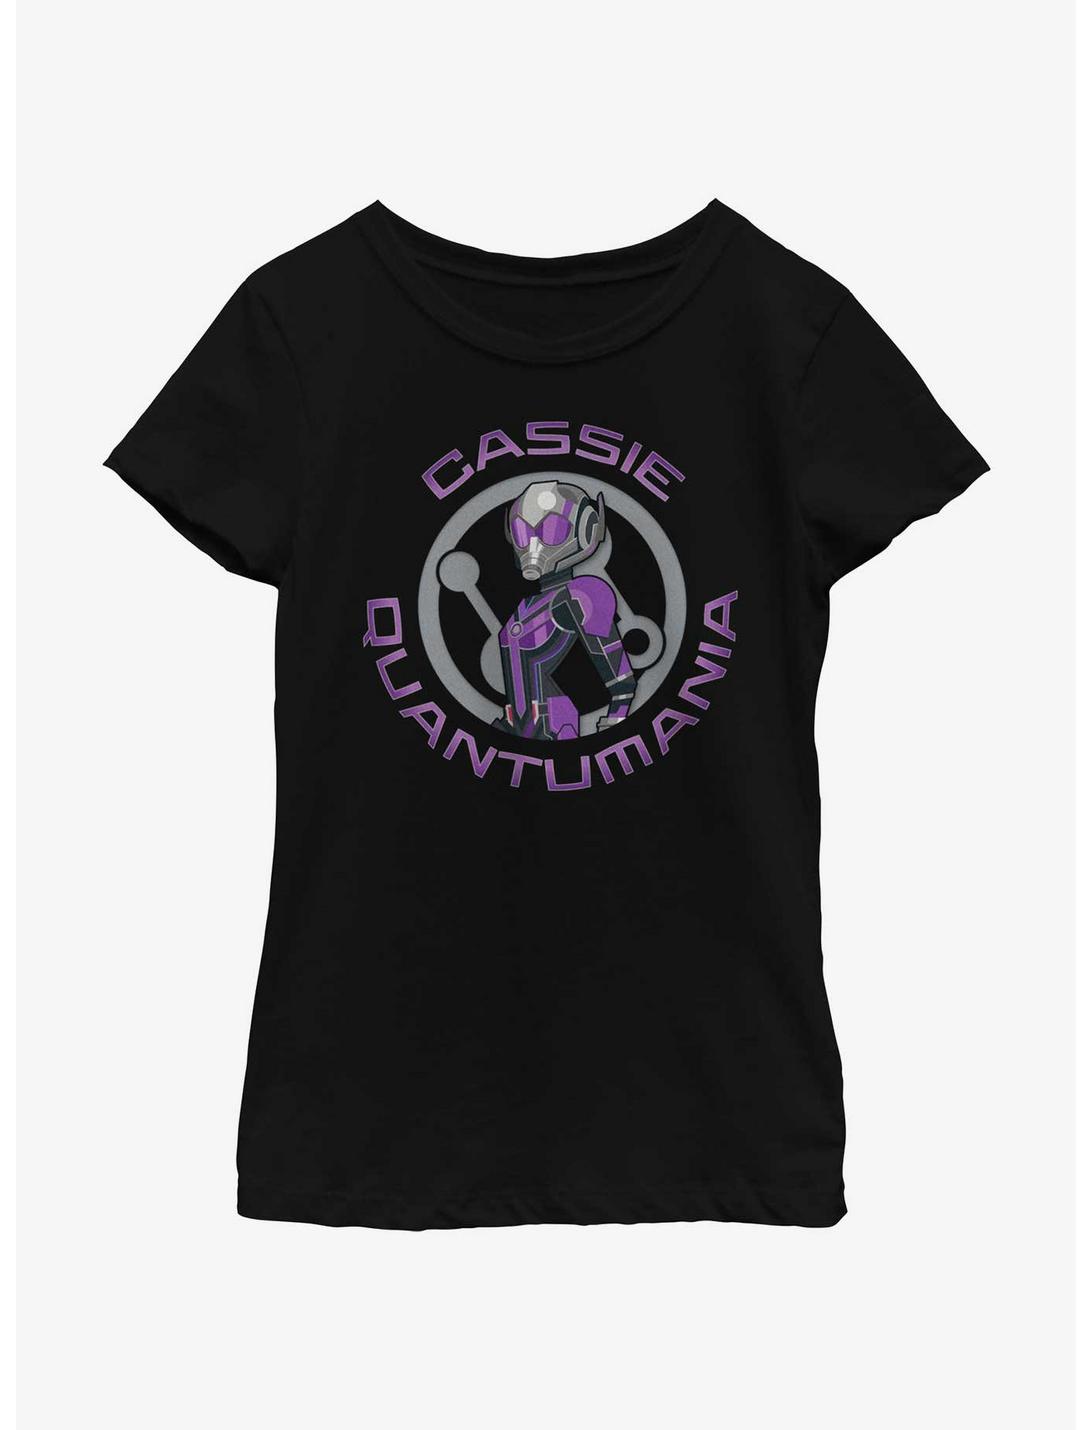 Marvel Ant-Man and the Wasp: Quantumania Cassie Badge Youth Girls T-Shirt, BLACK, hi-res